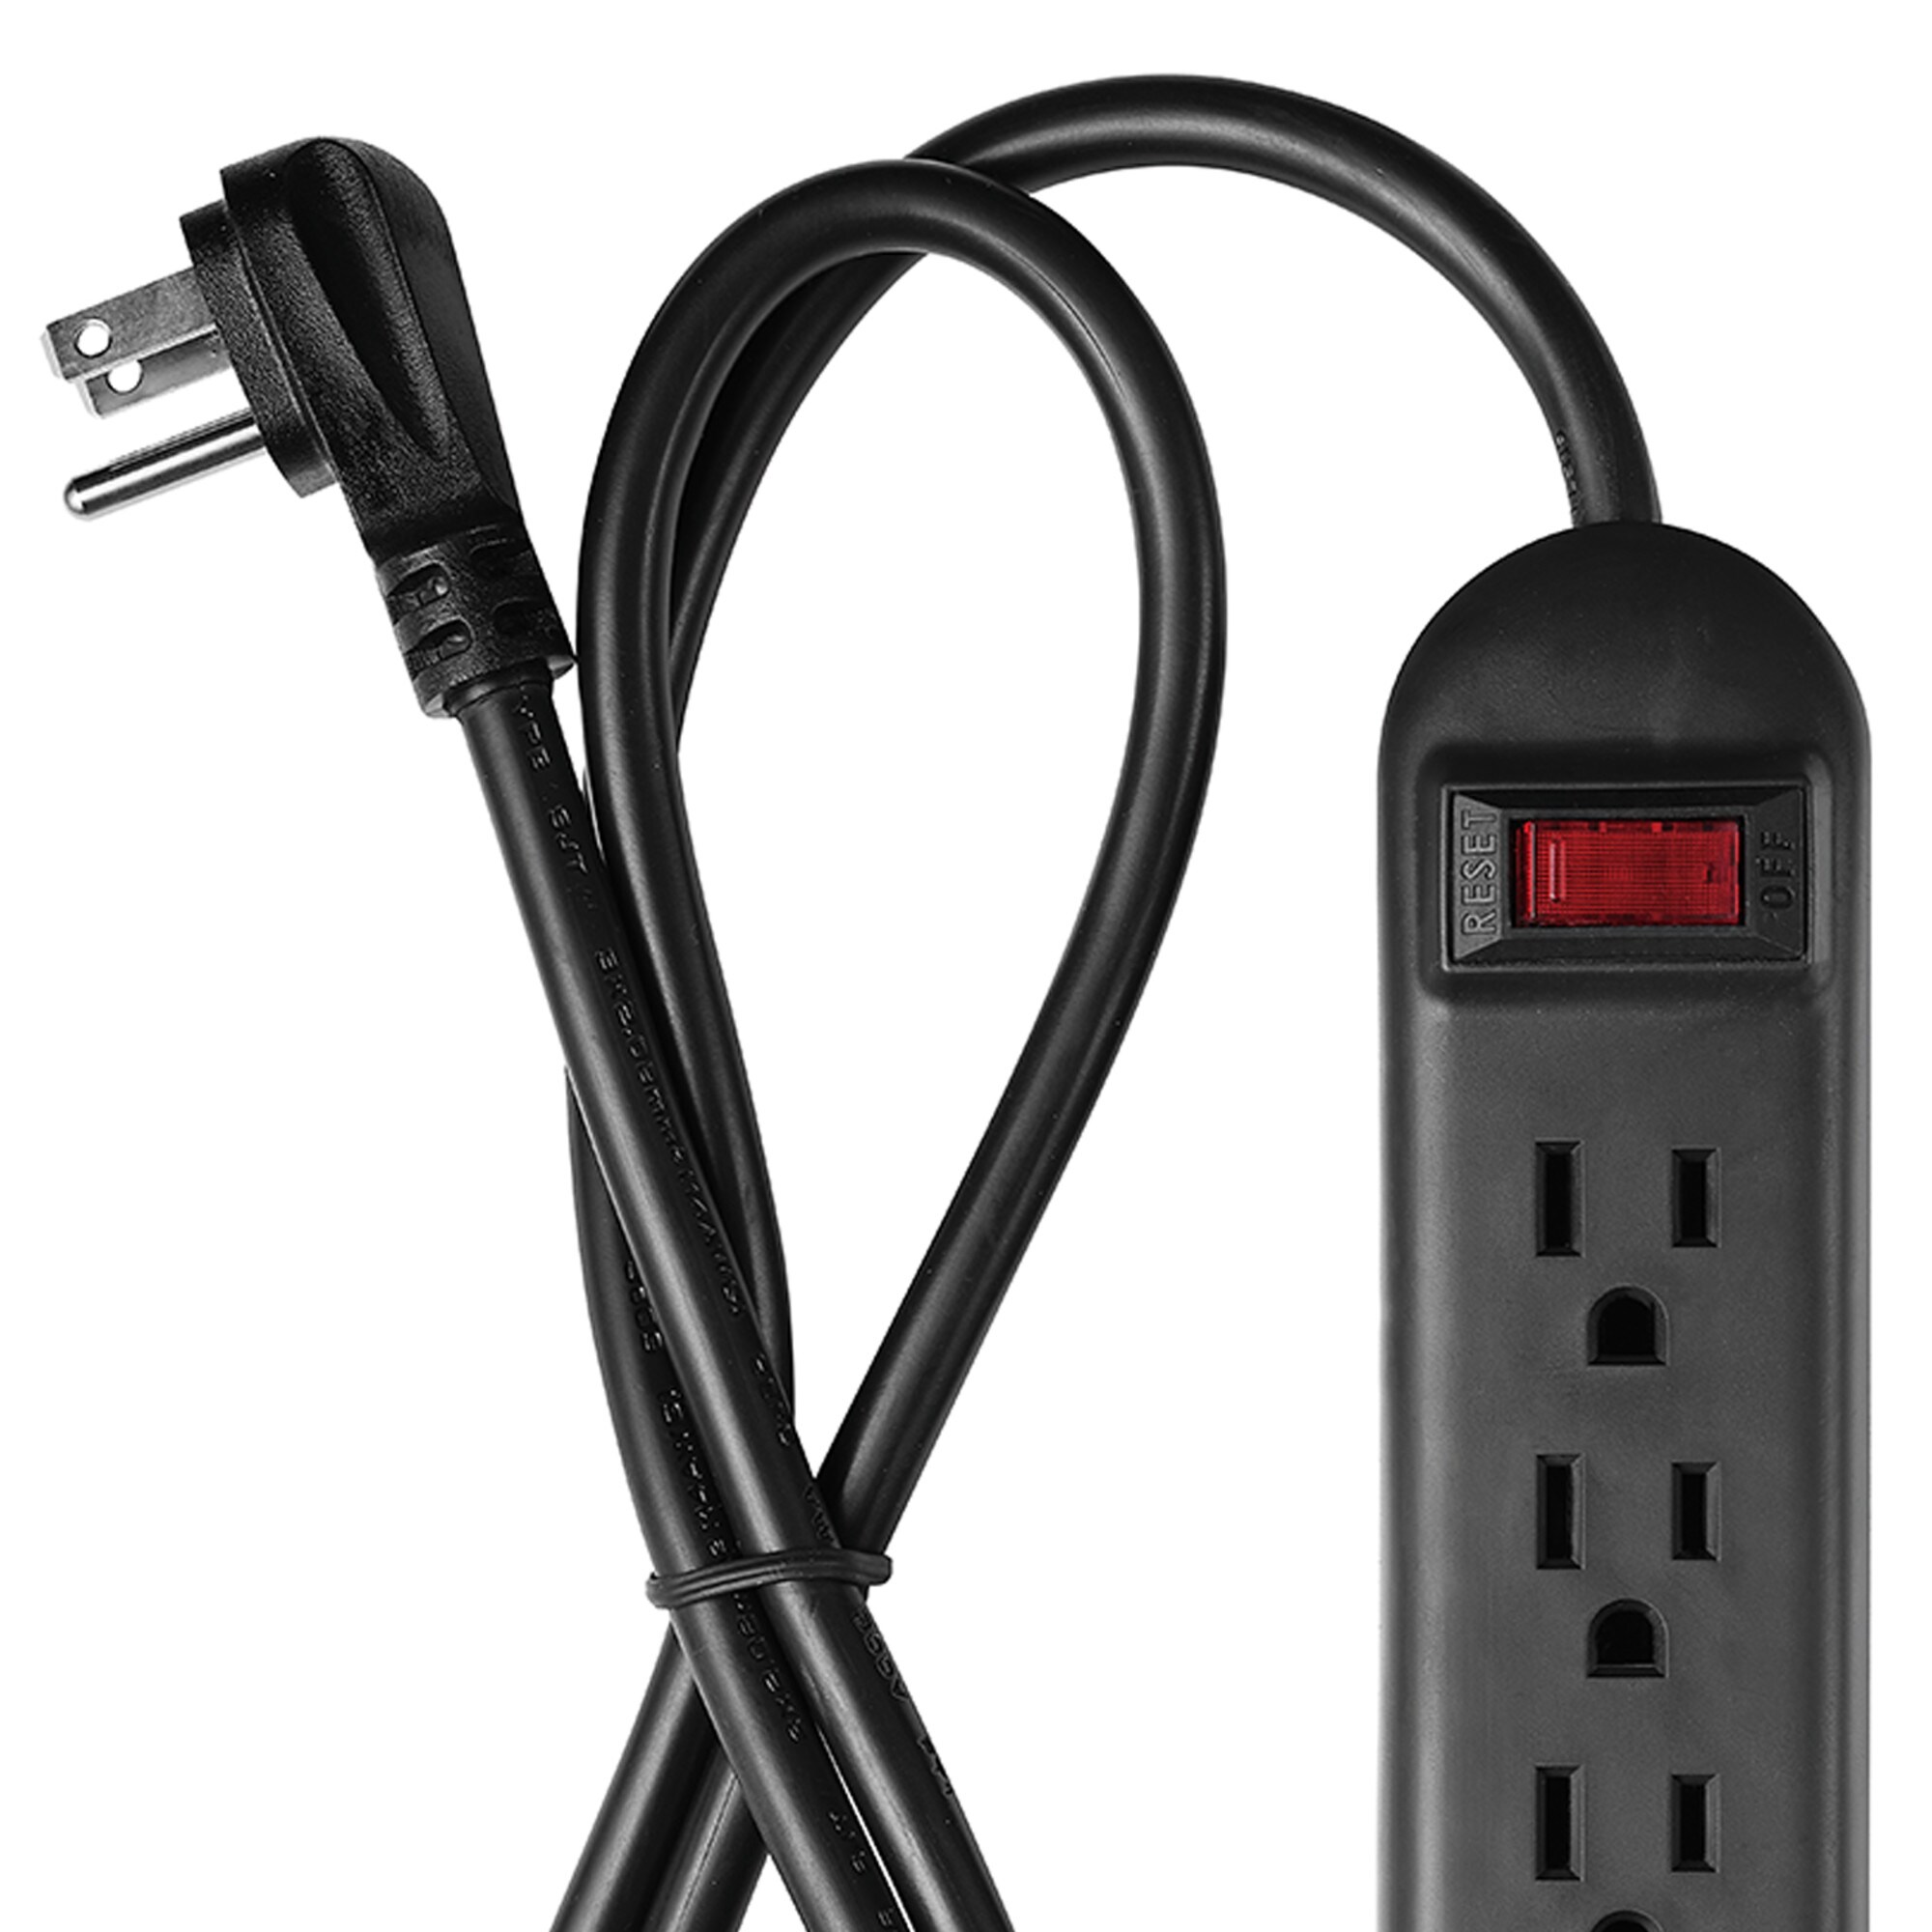 6-Outlet Power Strip with 4 ft. Cord Right Angle Plug (2-Pack